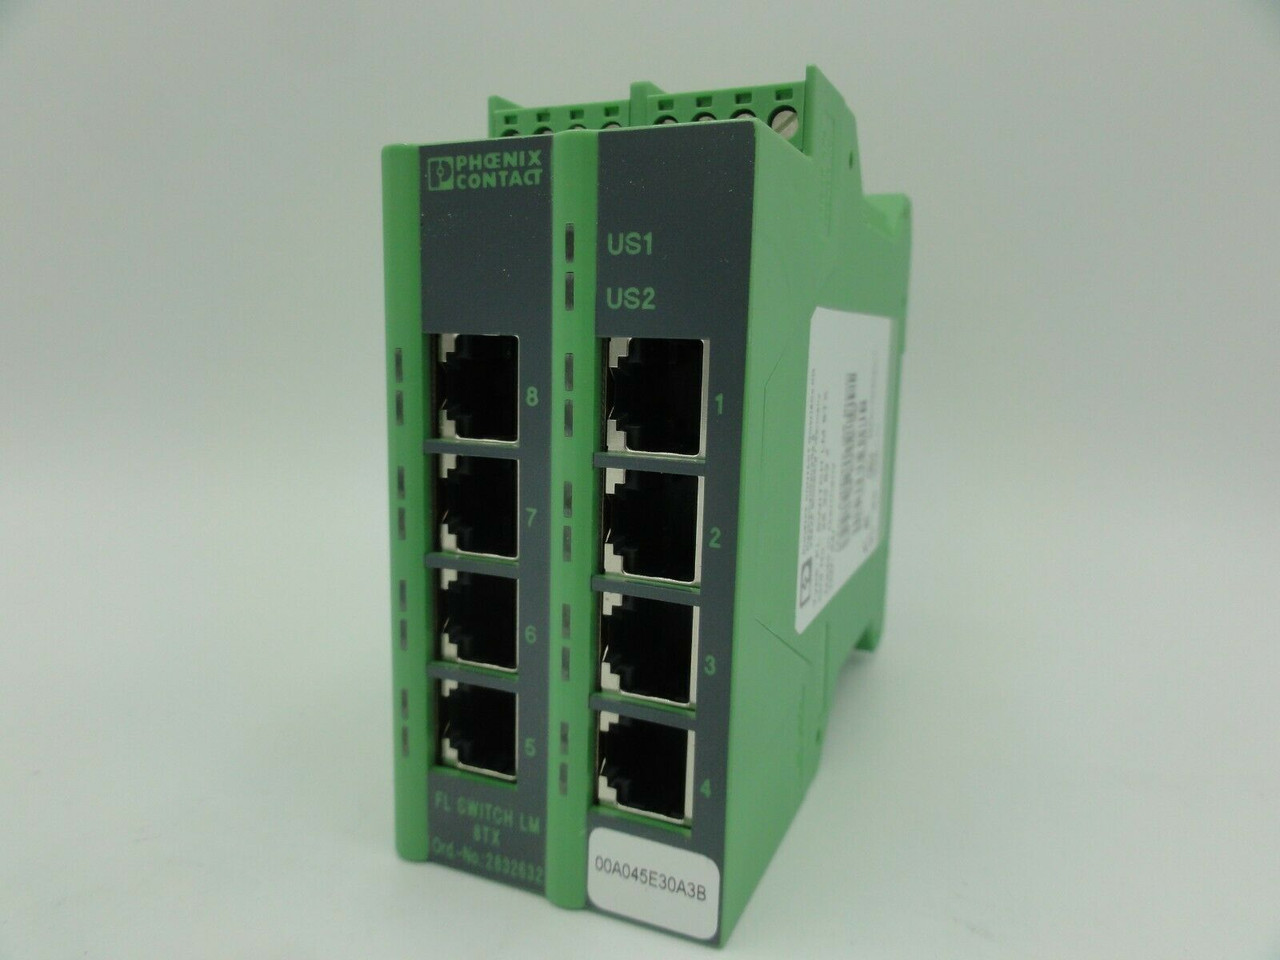 Phoenix Contact Industrial Ethernet Managed Type FL Switch LM 8TX, #2832632